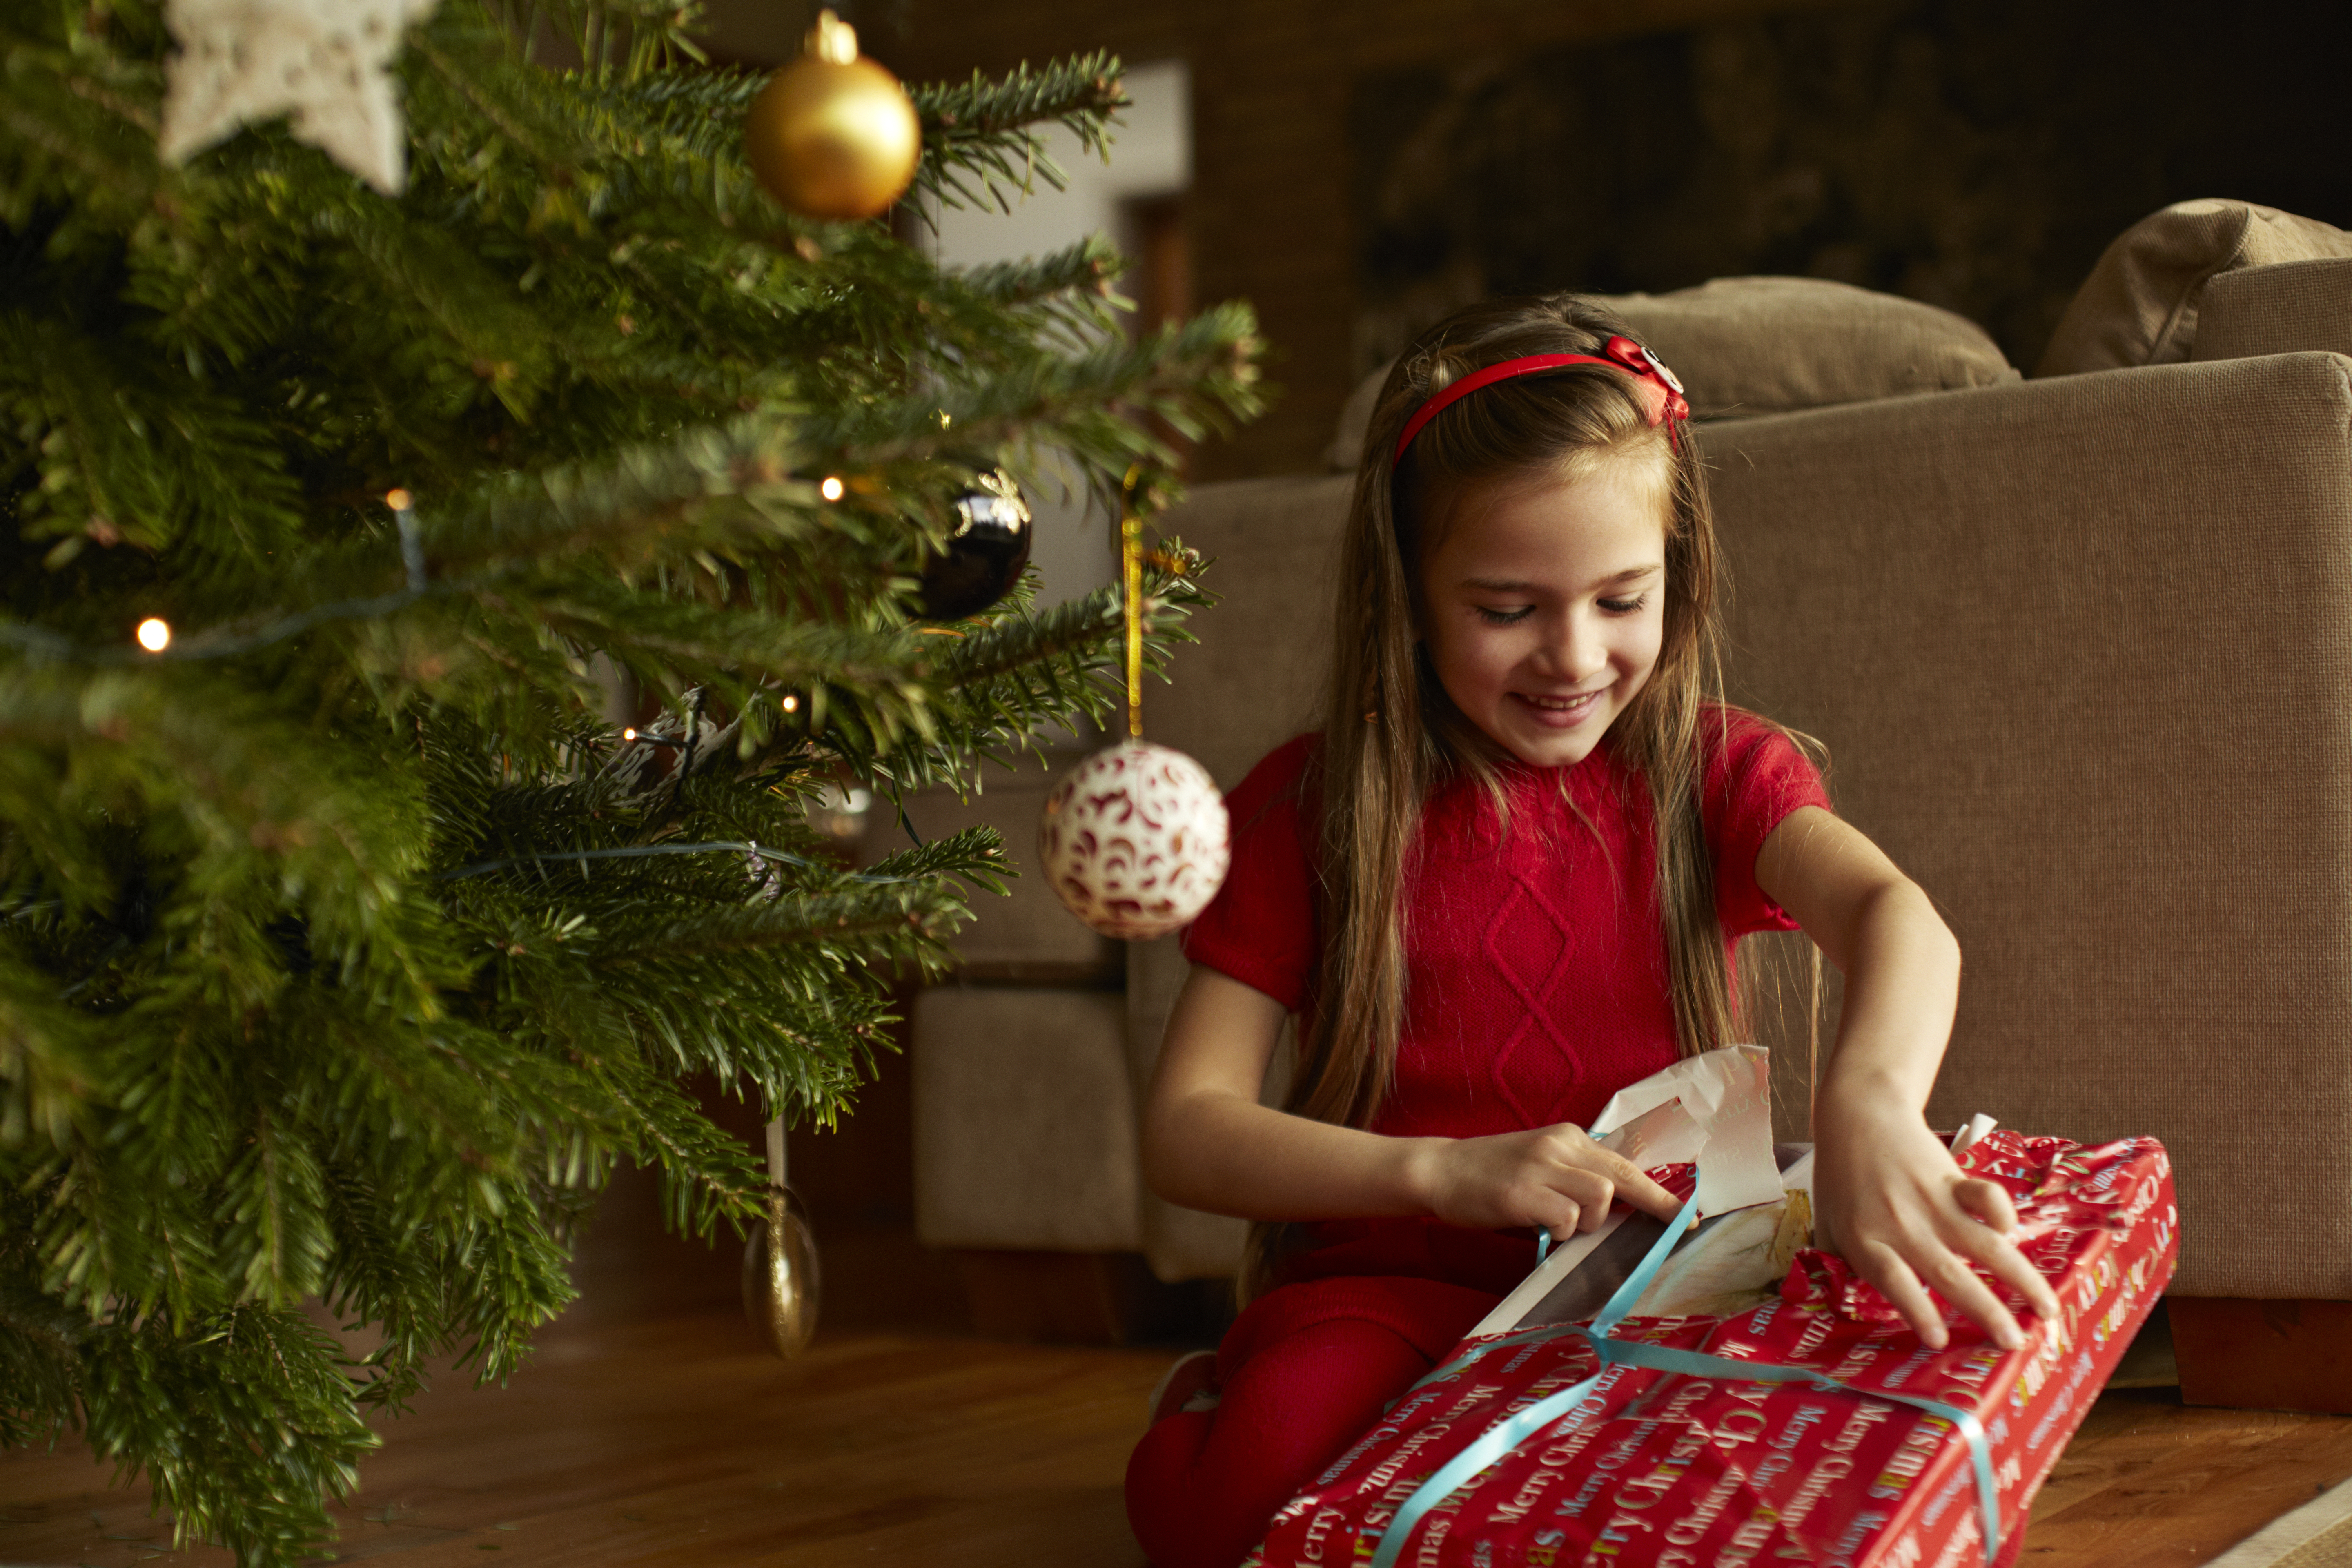 Little girl opening a Christmas present | Source: Getty Images